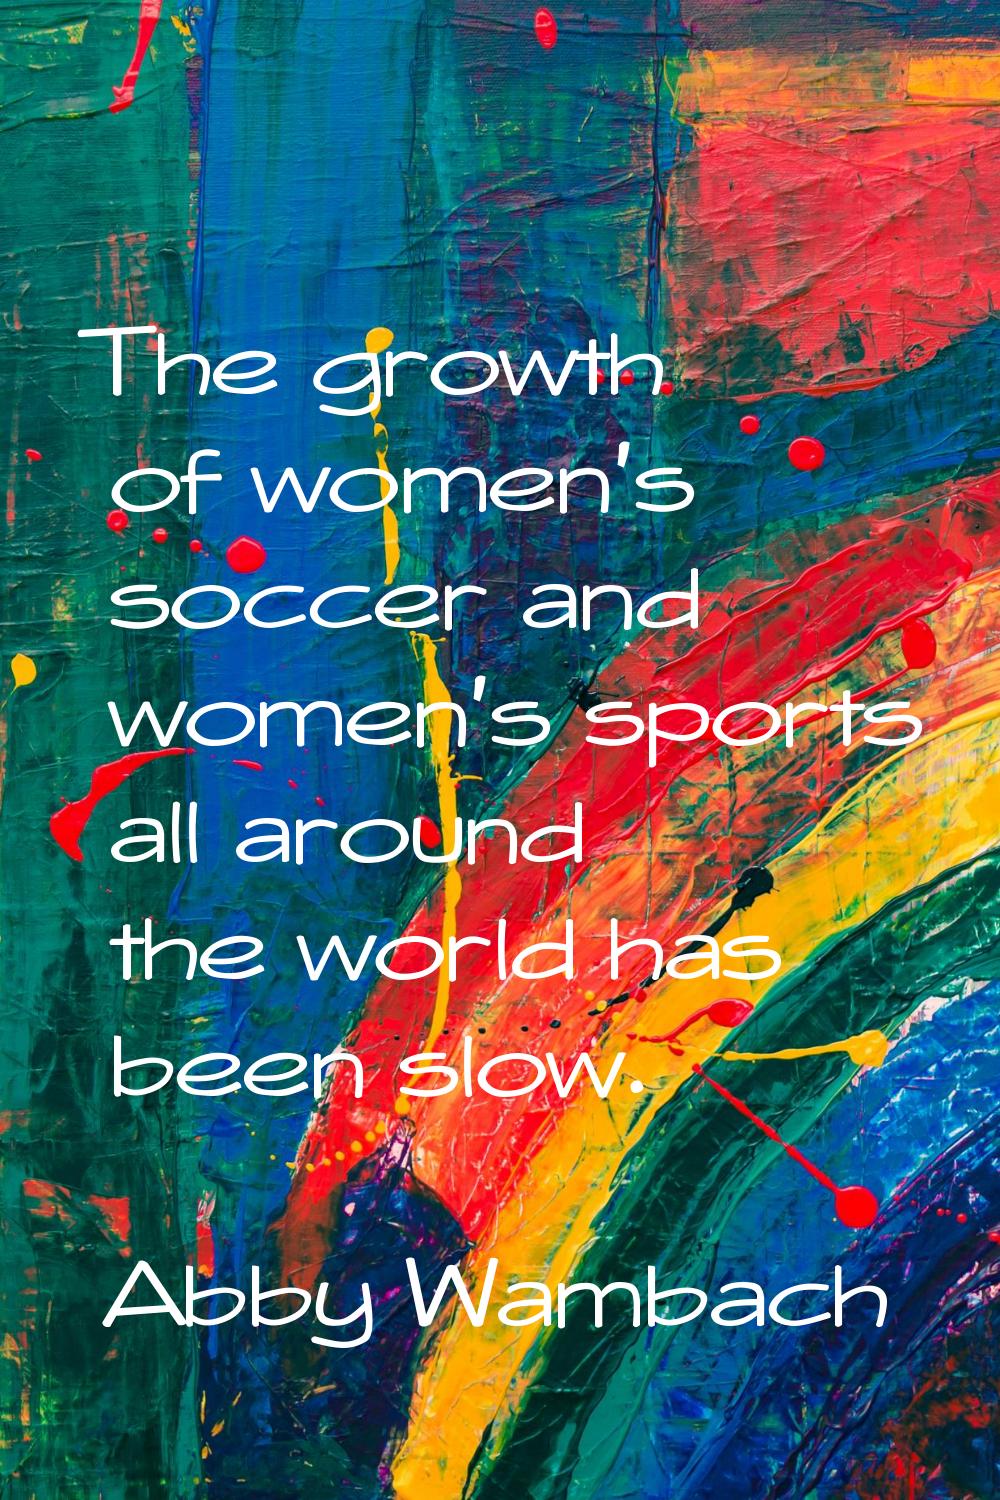 The growth of women's soccer and women's sports all around the world has been slow.